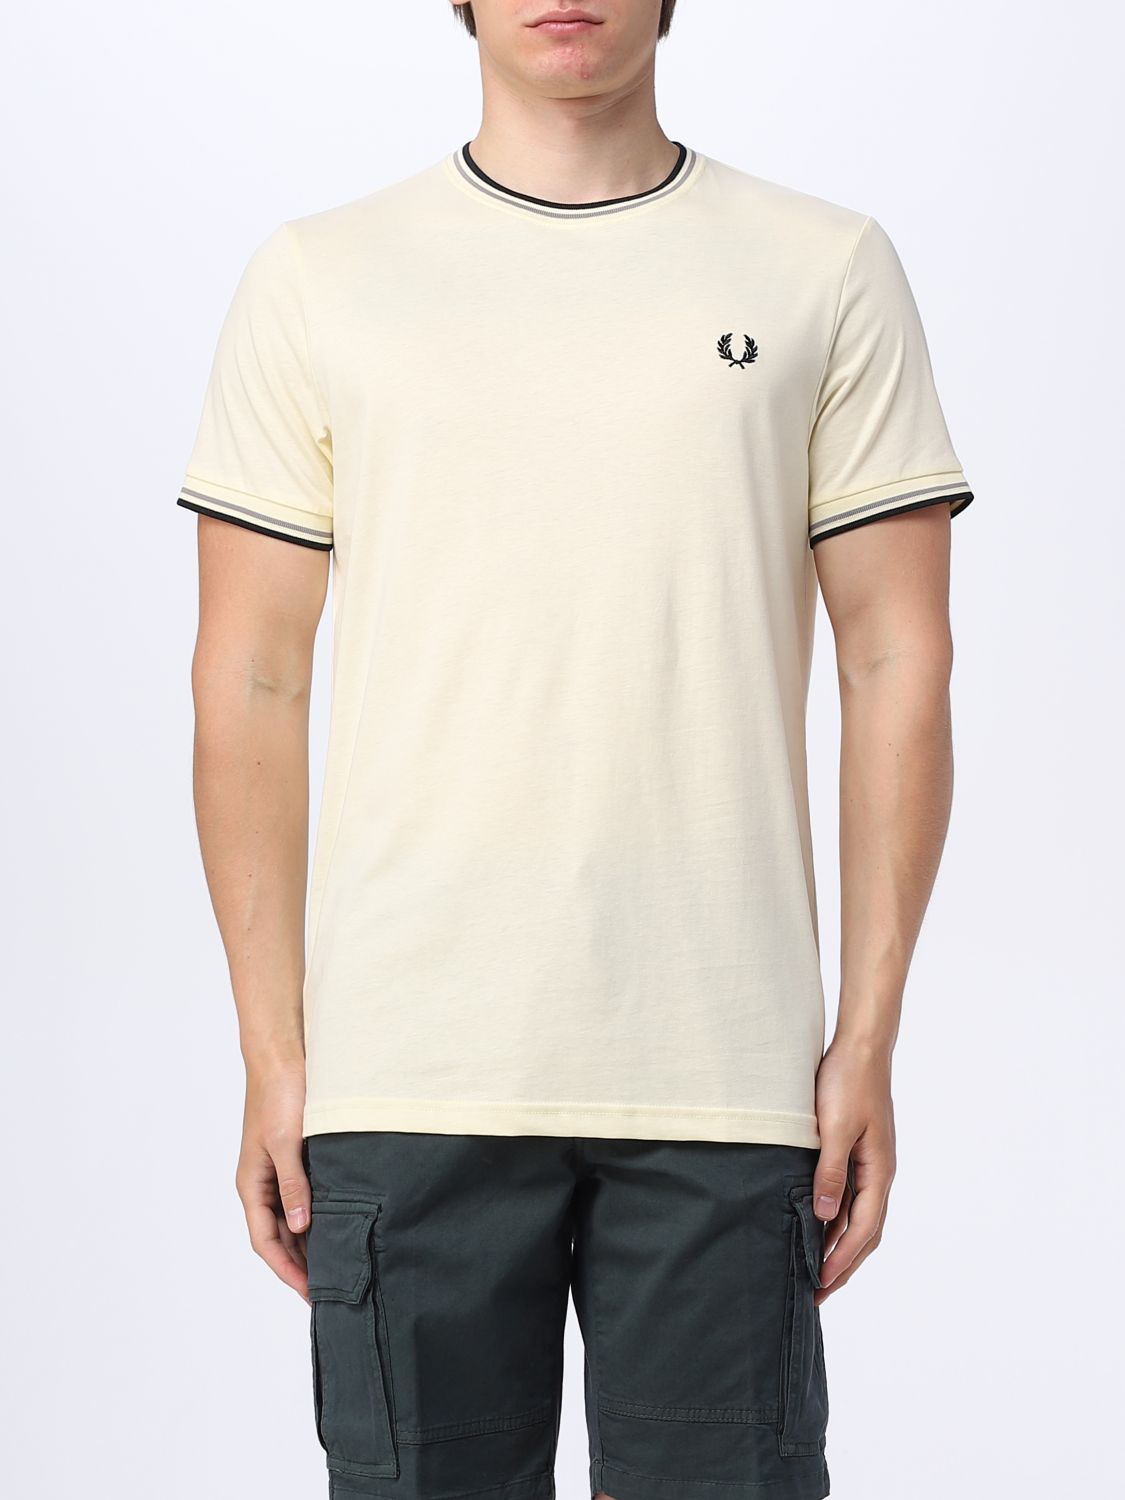 FRED PERRY: t-shirt for man - Cream | Fred Perry t-shirt M1588 online ...